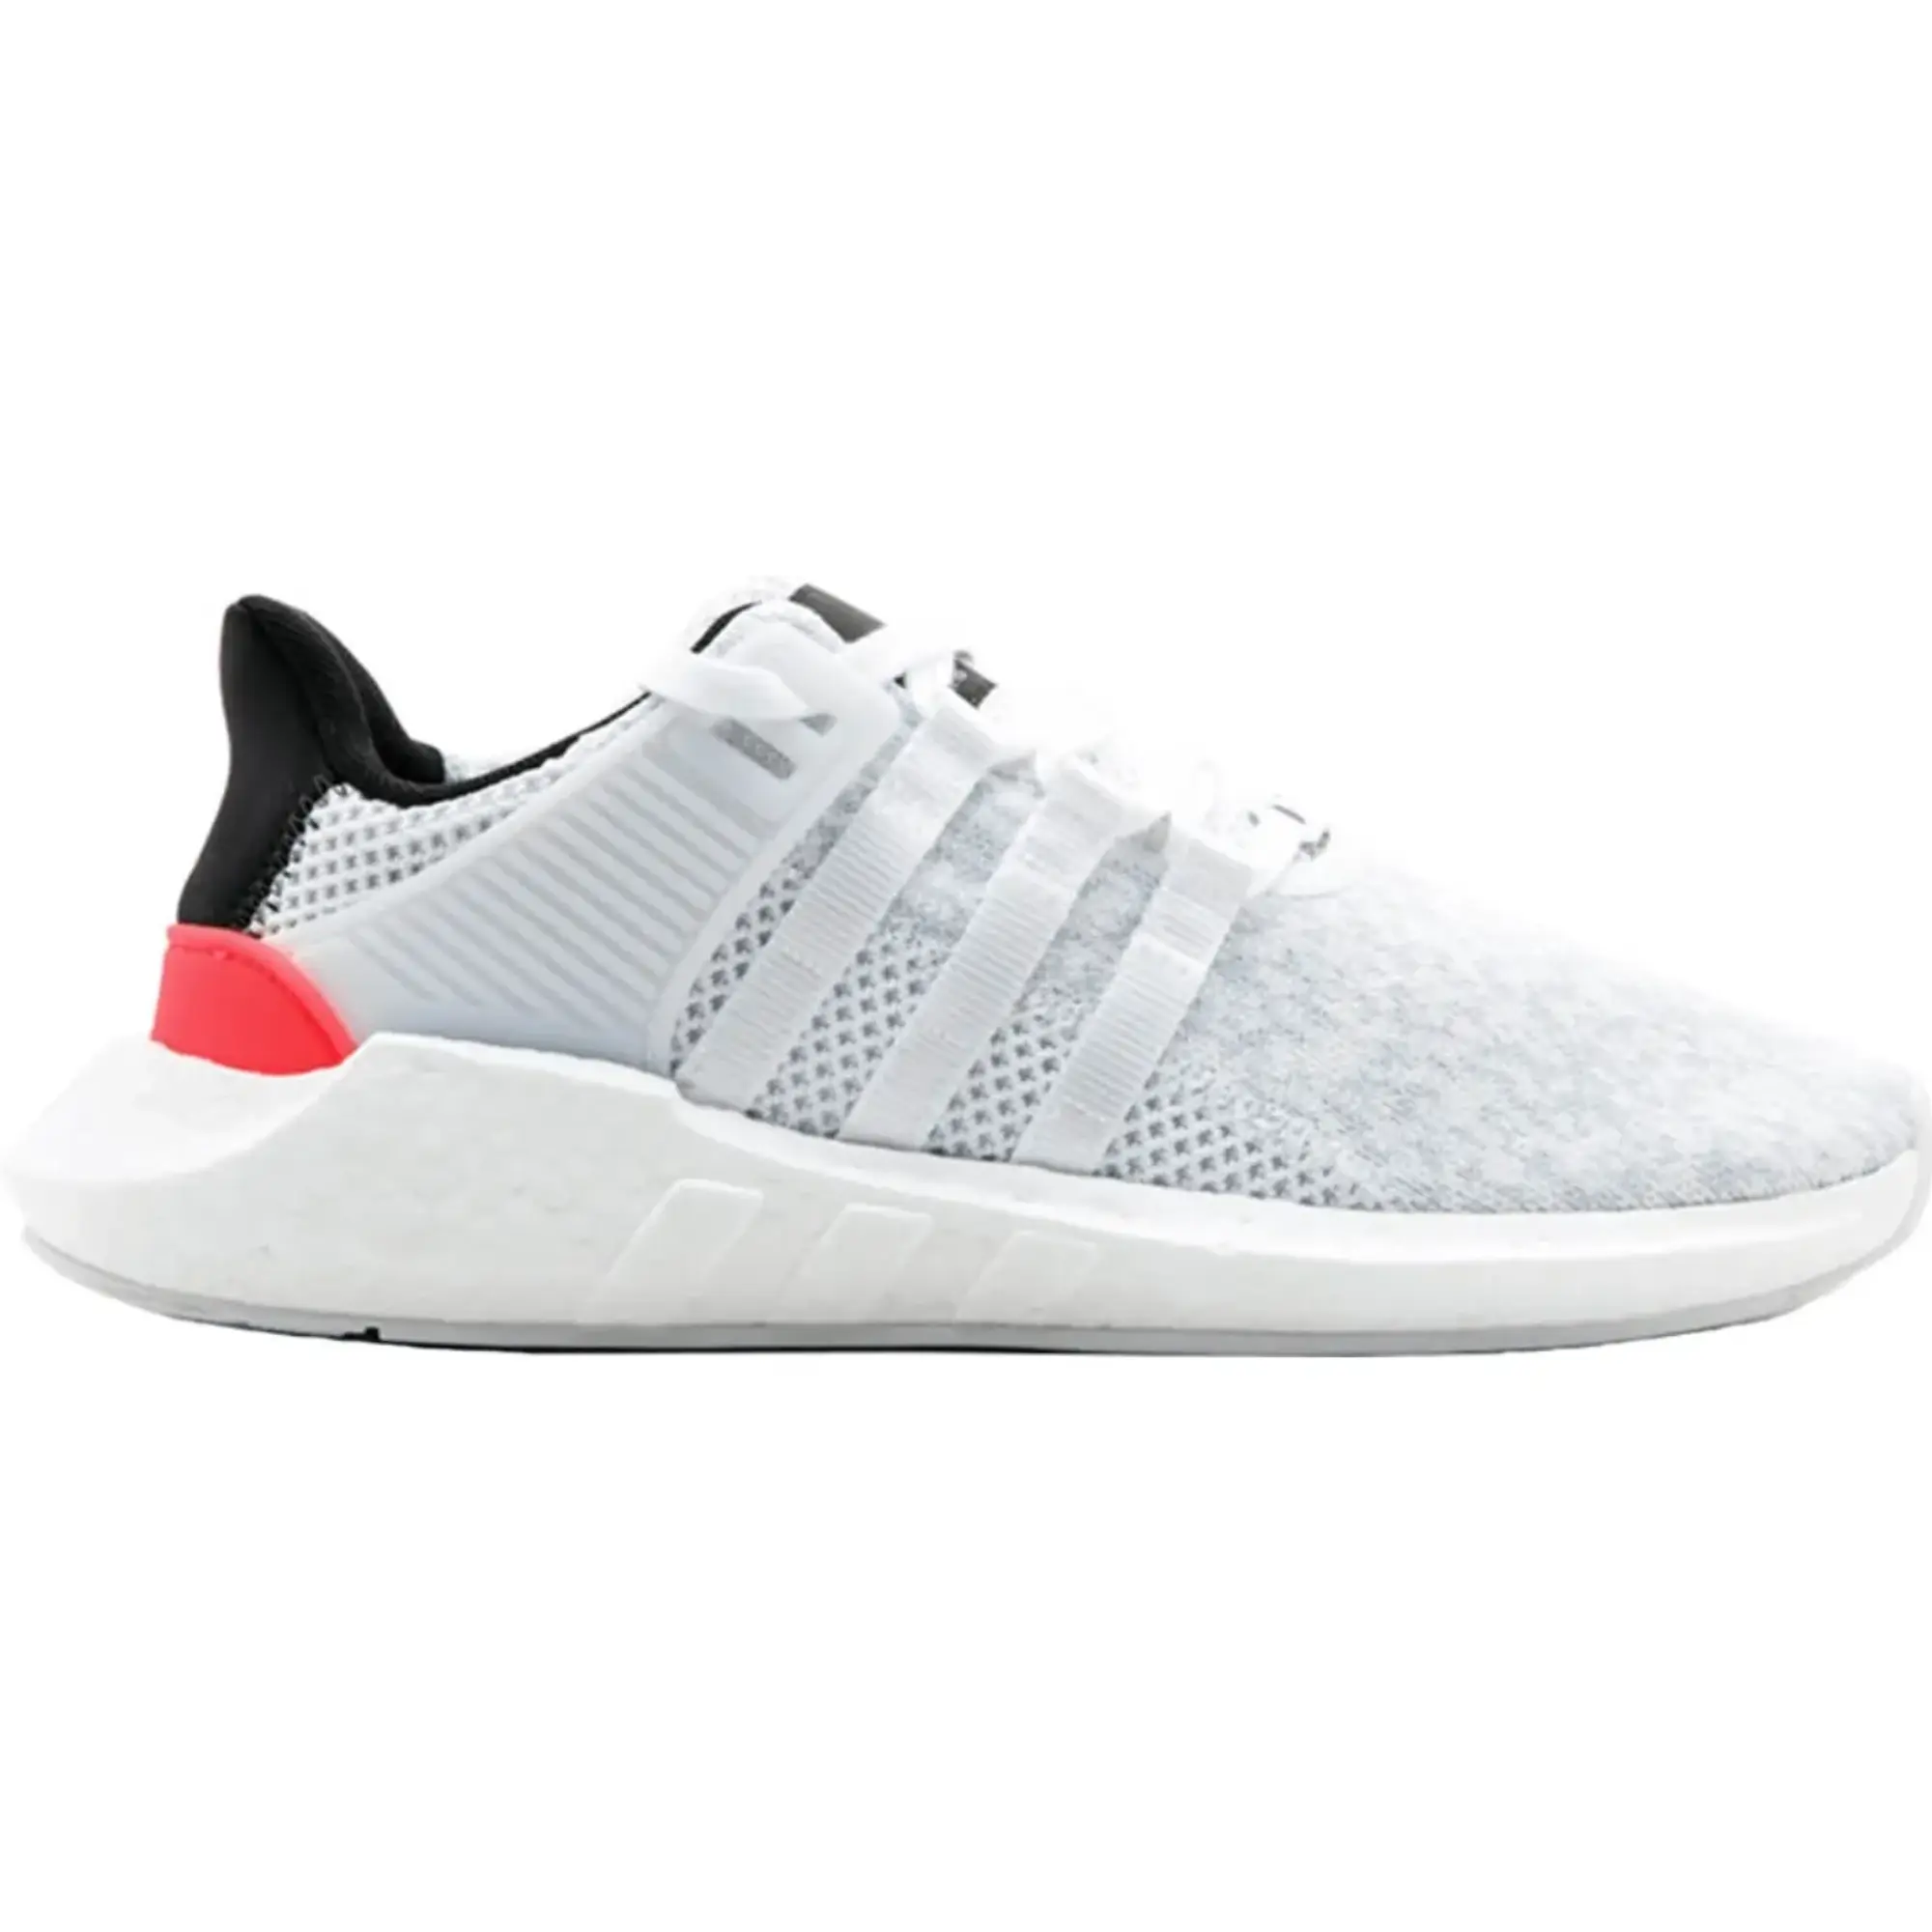 adidas EQT Support 93/17 White Turbo Red